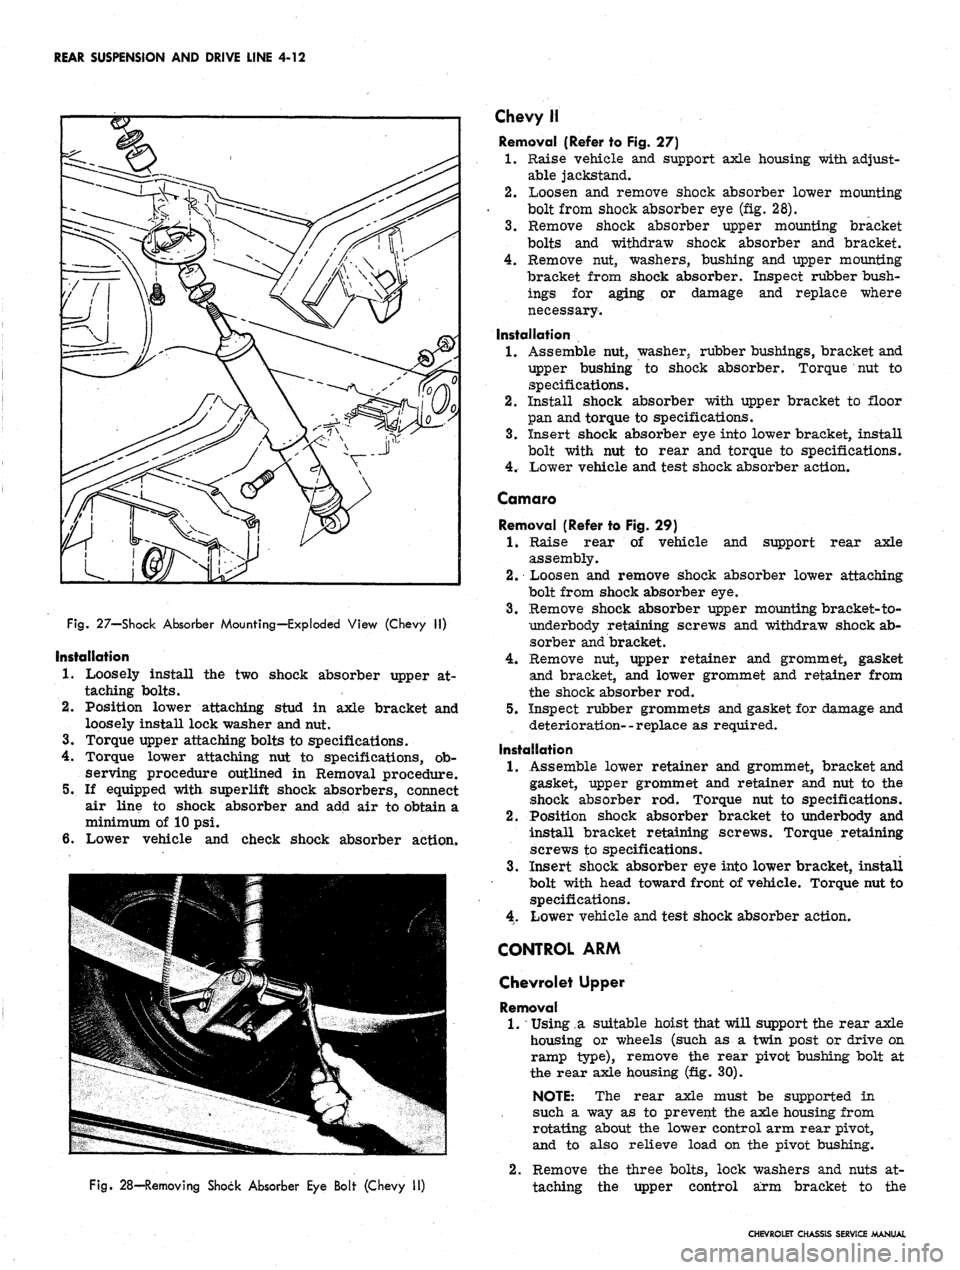 CHEVROLET CAMARO 1967 1.G Chassis Workshop Manual 
REAR SUSPENSION AND DRIVE LINE 4-12

Fig.
 27—Shock Absorber Mounting—Exploded View (Chevy II)

Installation

1.
 Loosely install the two shock absorber upper at-

taching bolts.

2.
 Position lo